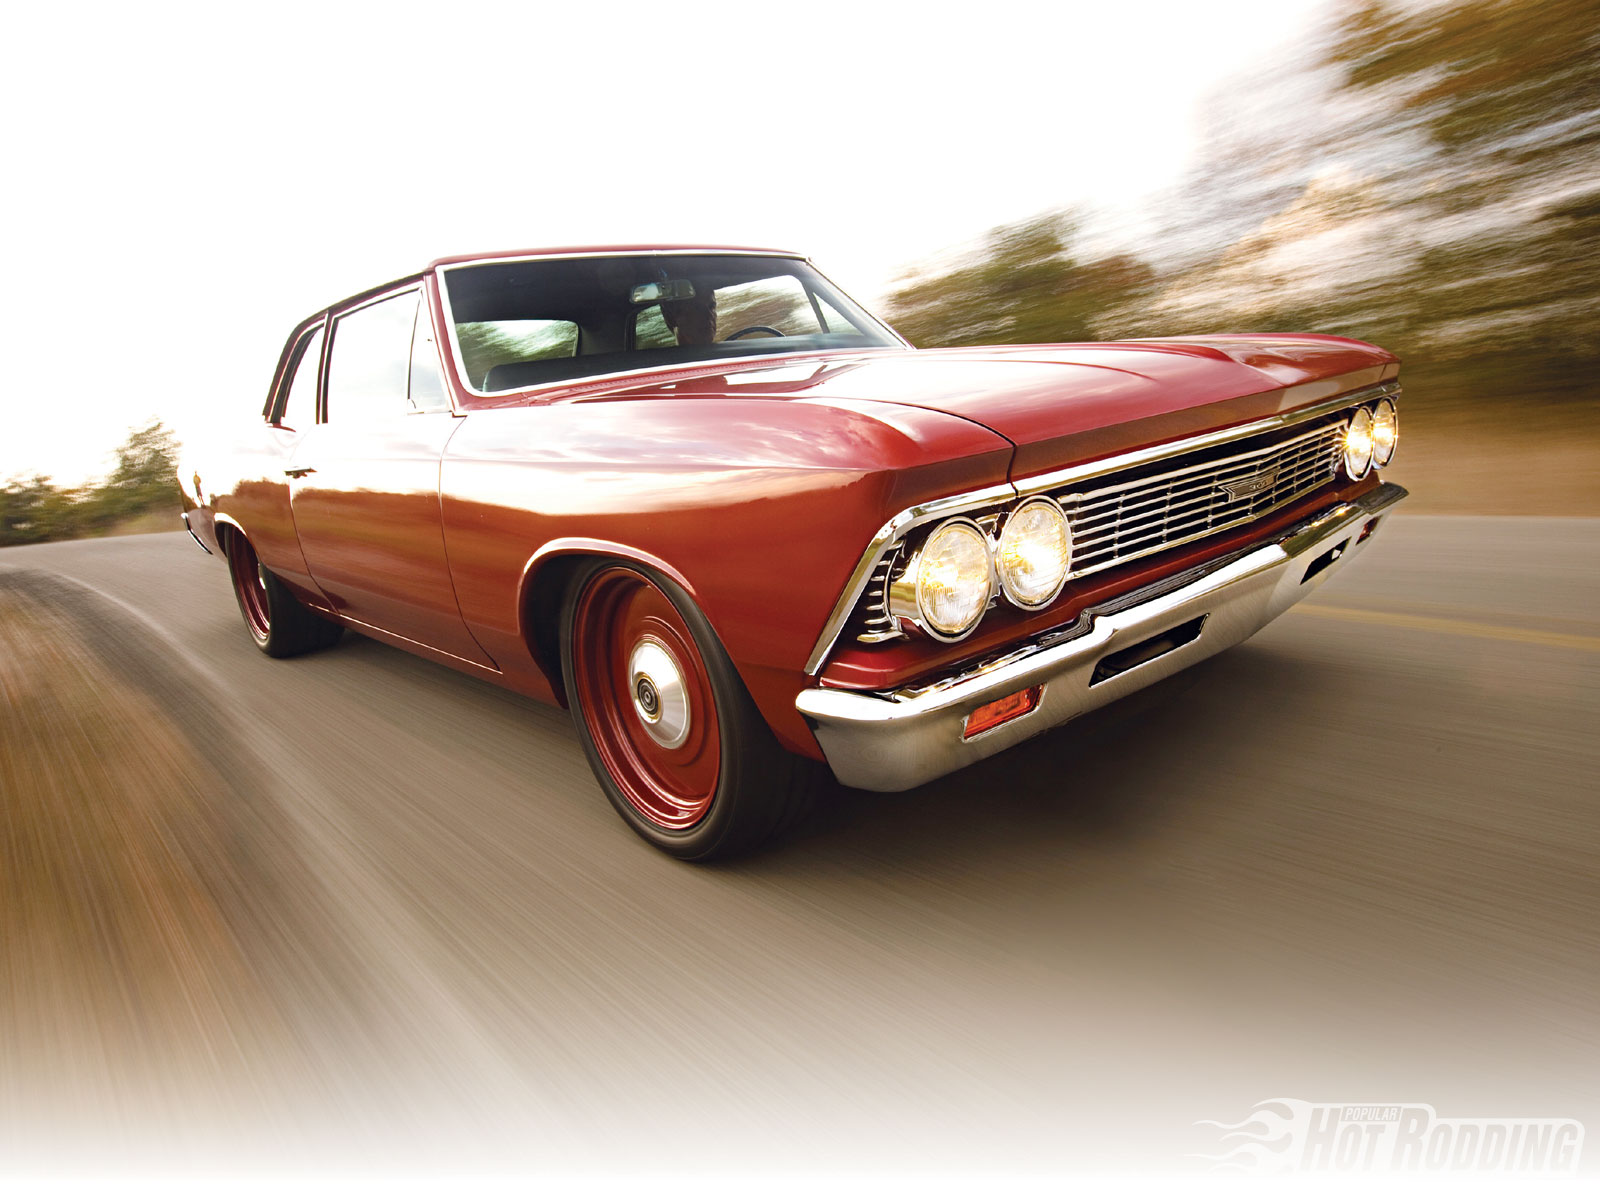 Chevy Chevelle Muscle Cars Hot Rod F Wallpaper Background